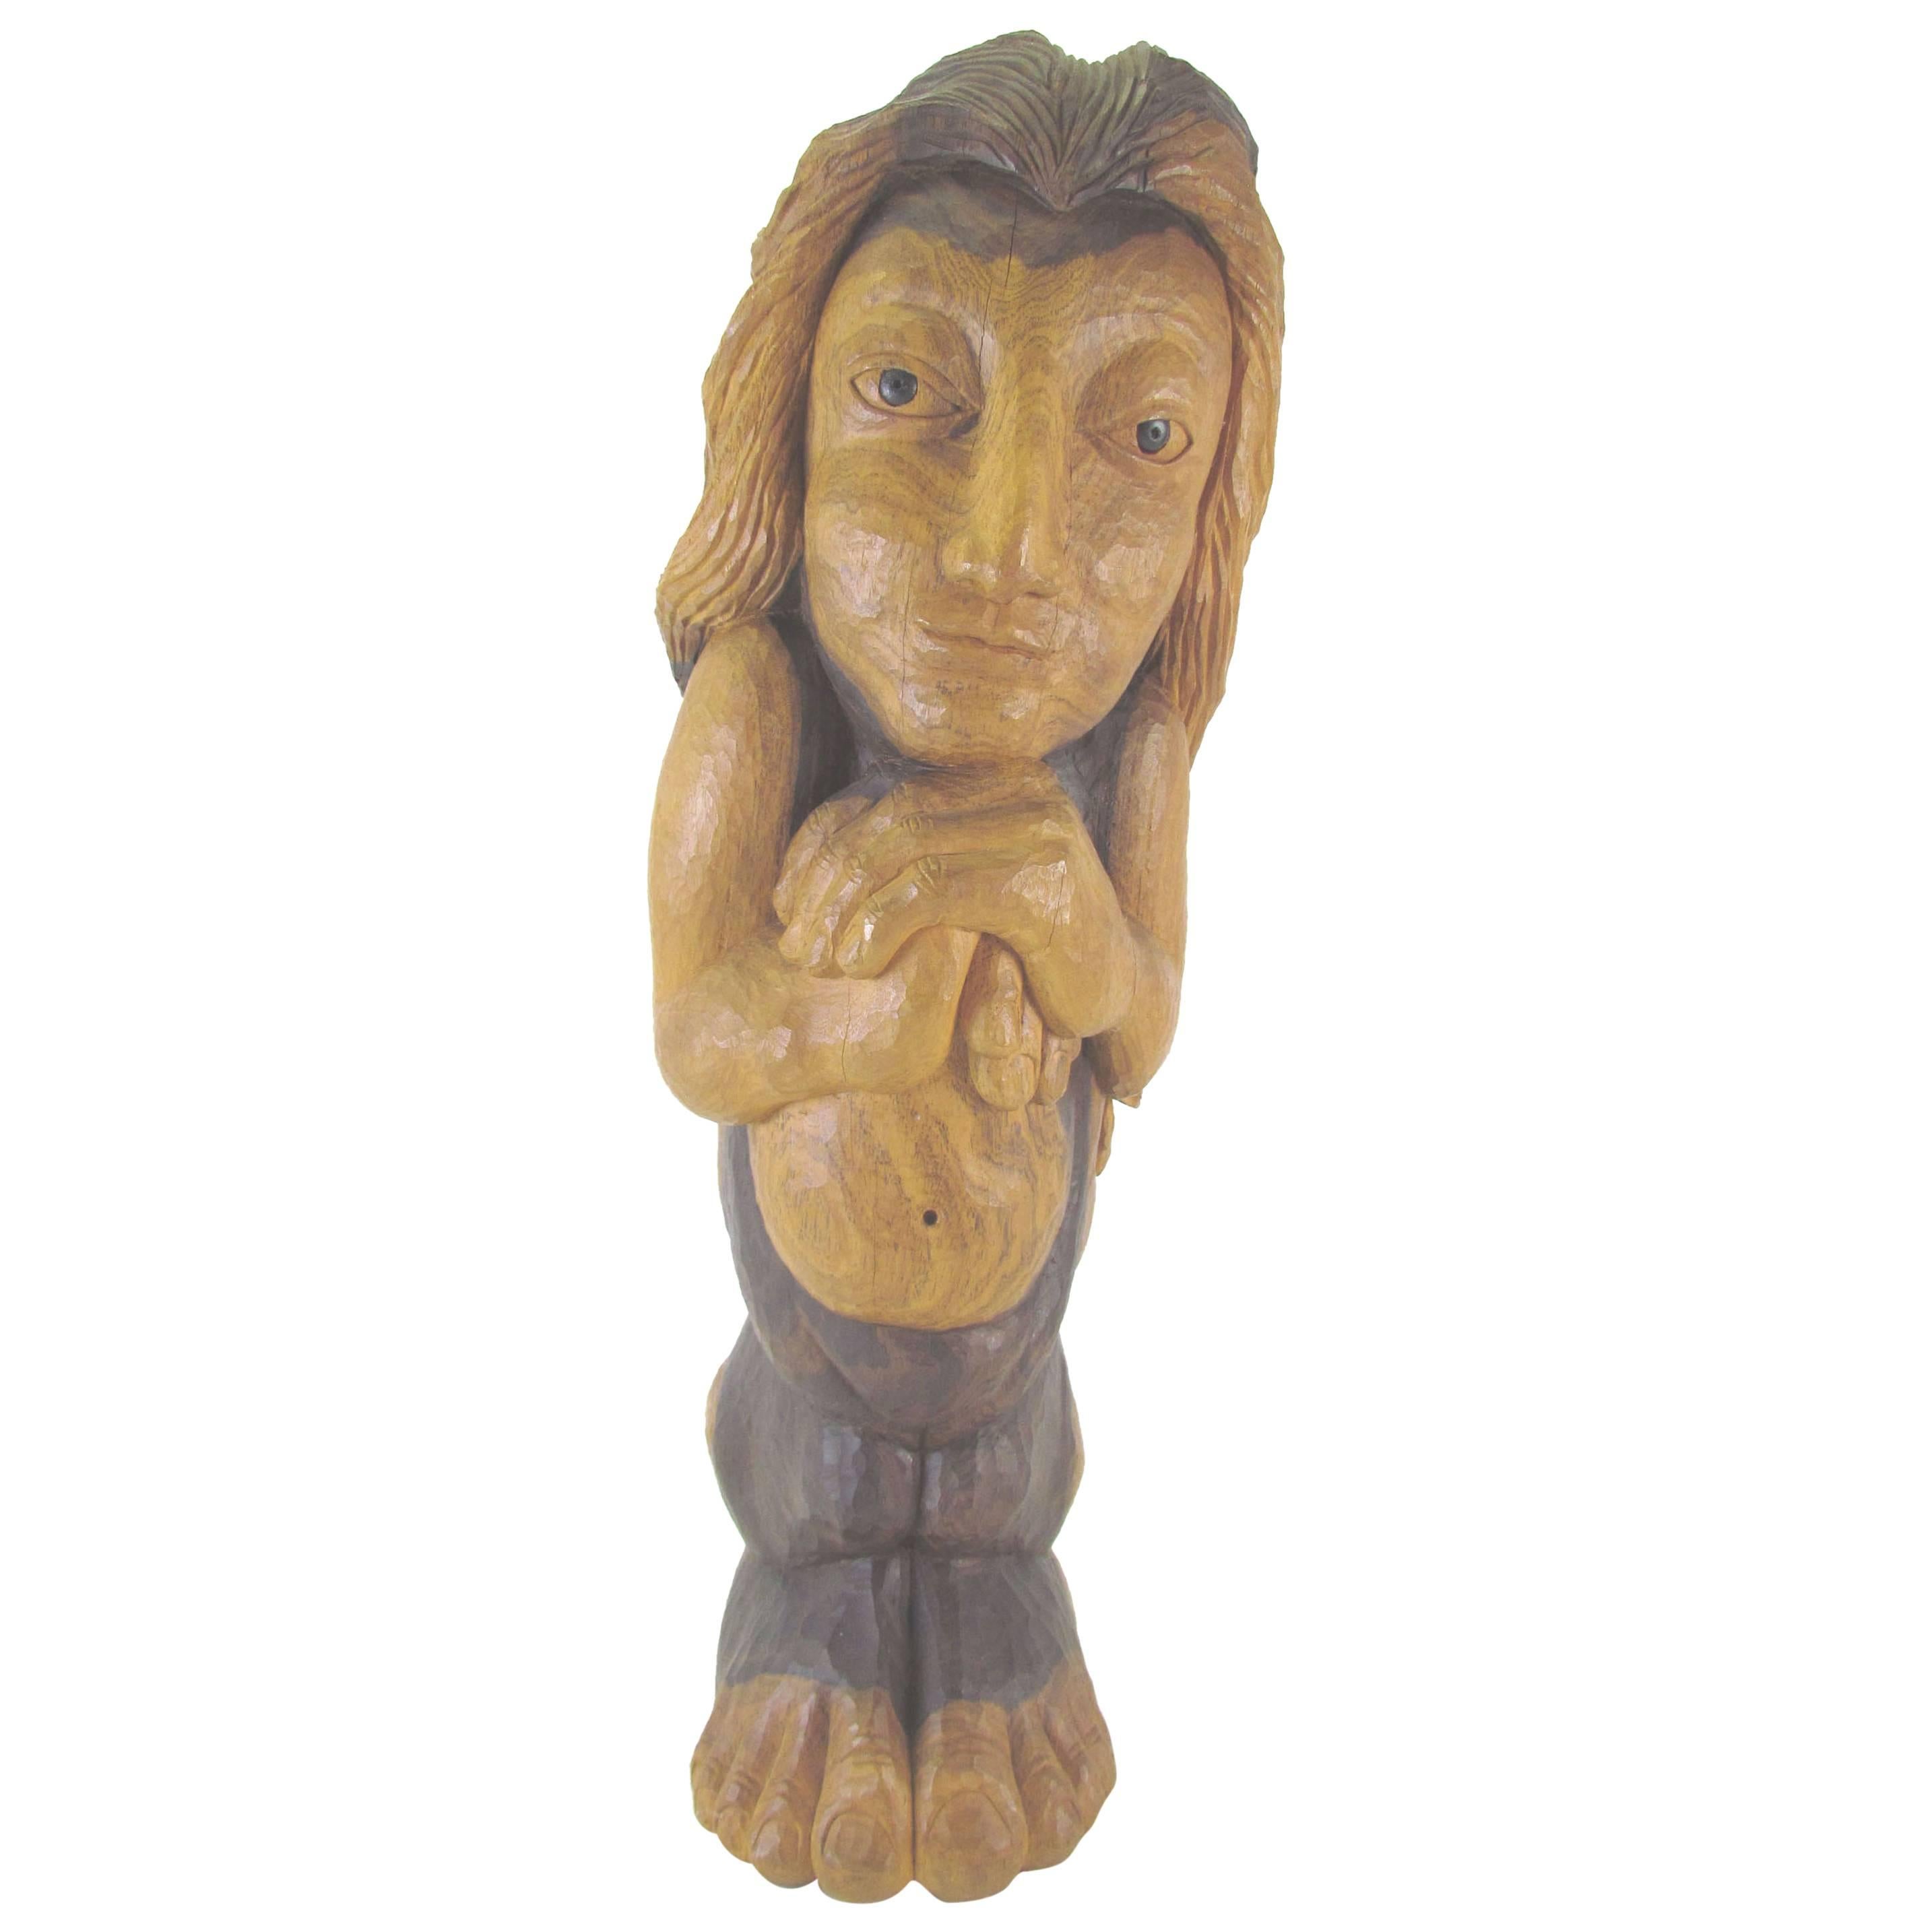 Carved Wood Mid-Century Sculpture Titled “Miss Num” by Diane Derrick